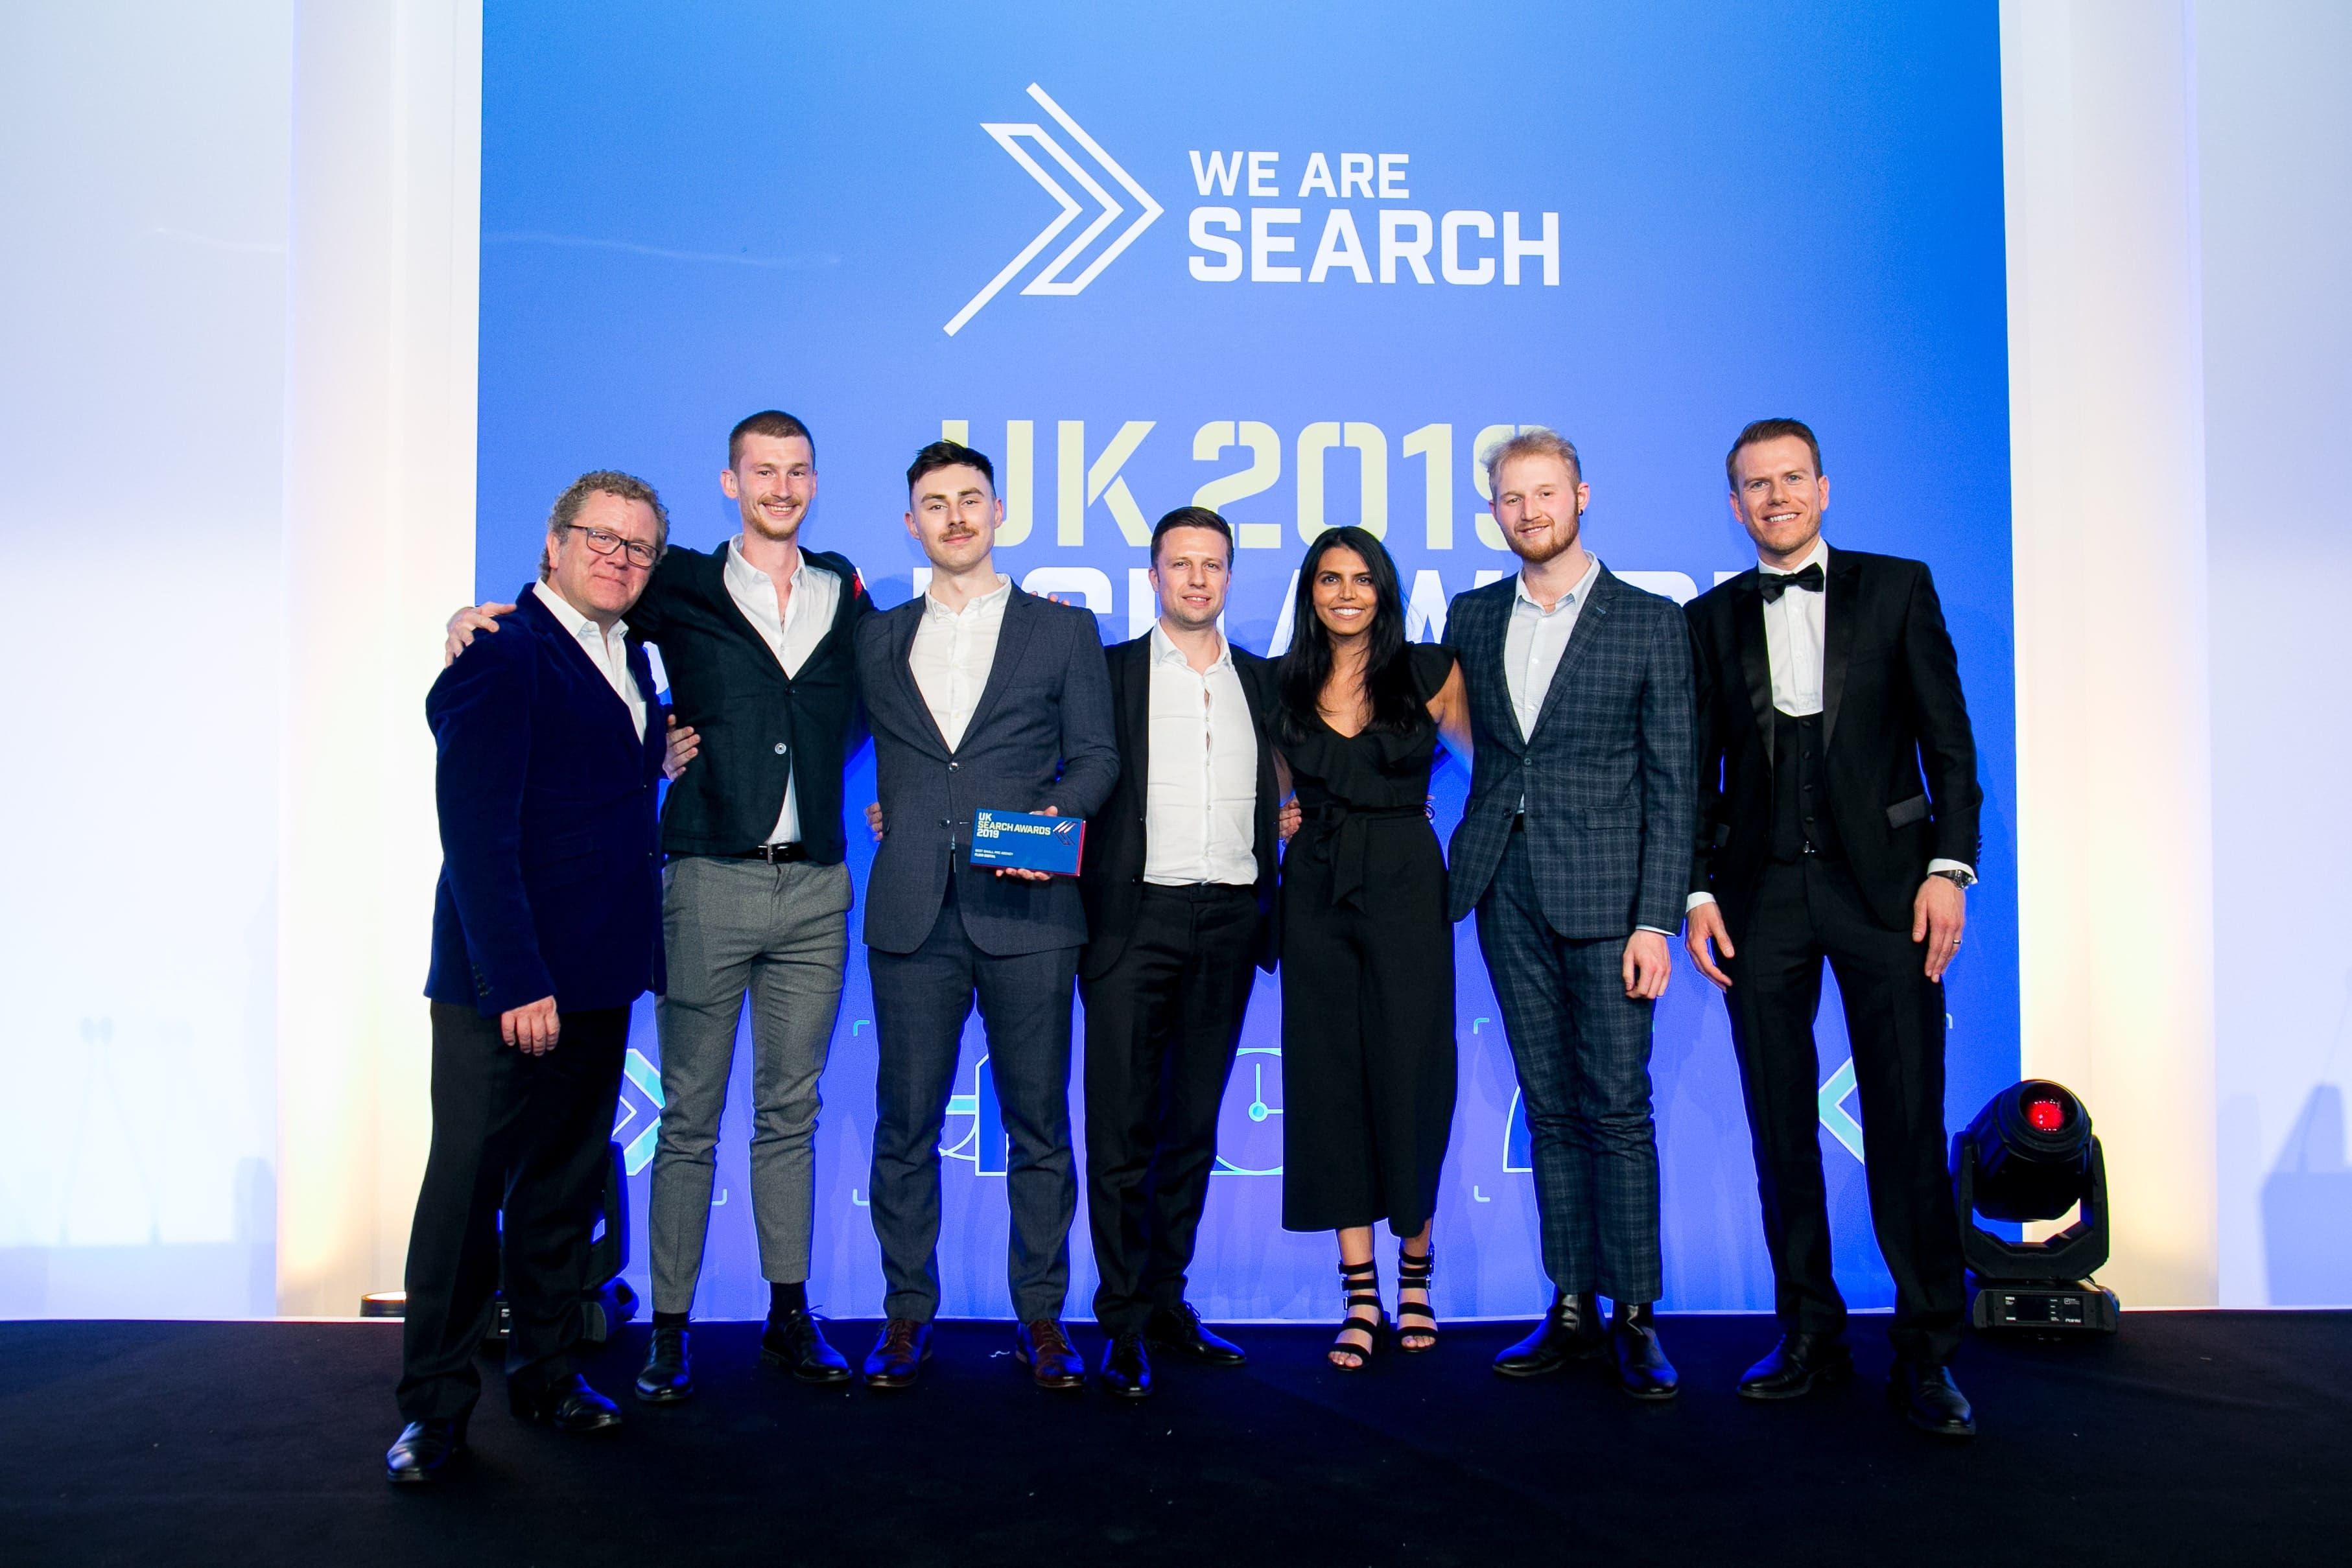 Fluid Digital Wins Best Small PPC Agency at the UK Search Awards 2019!